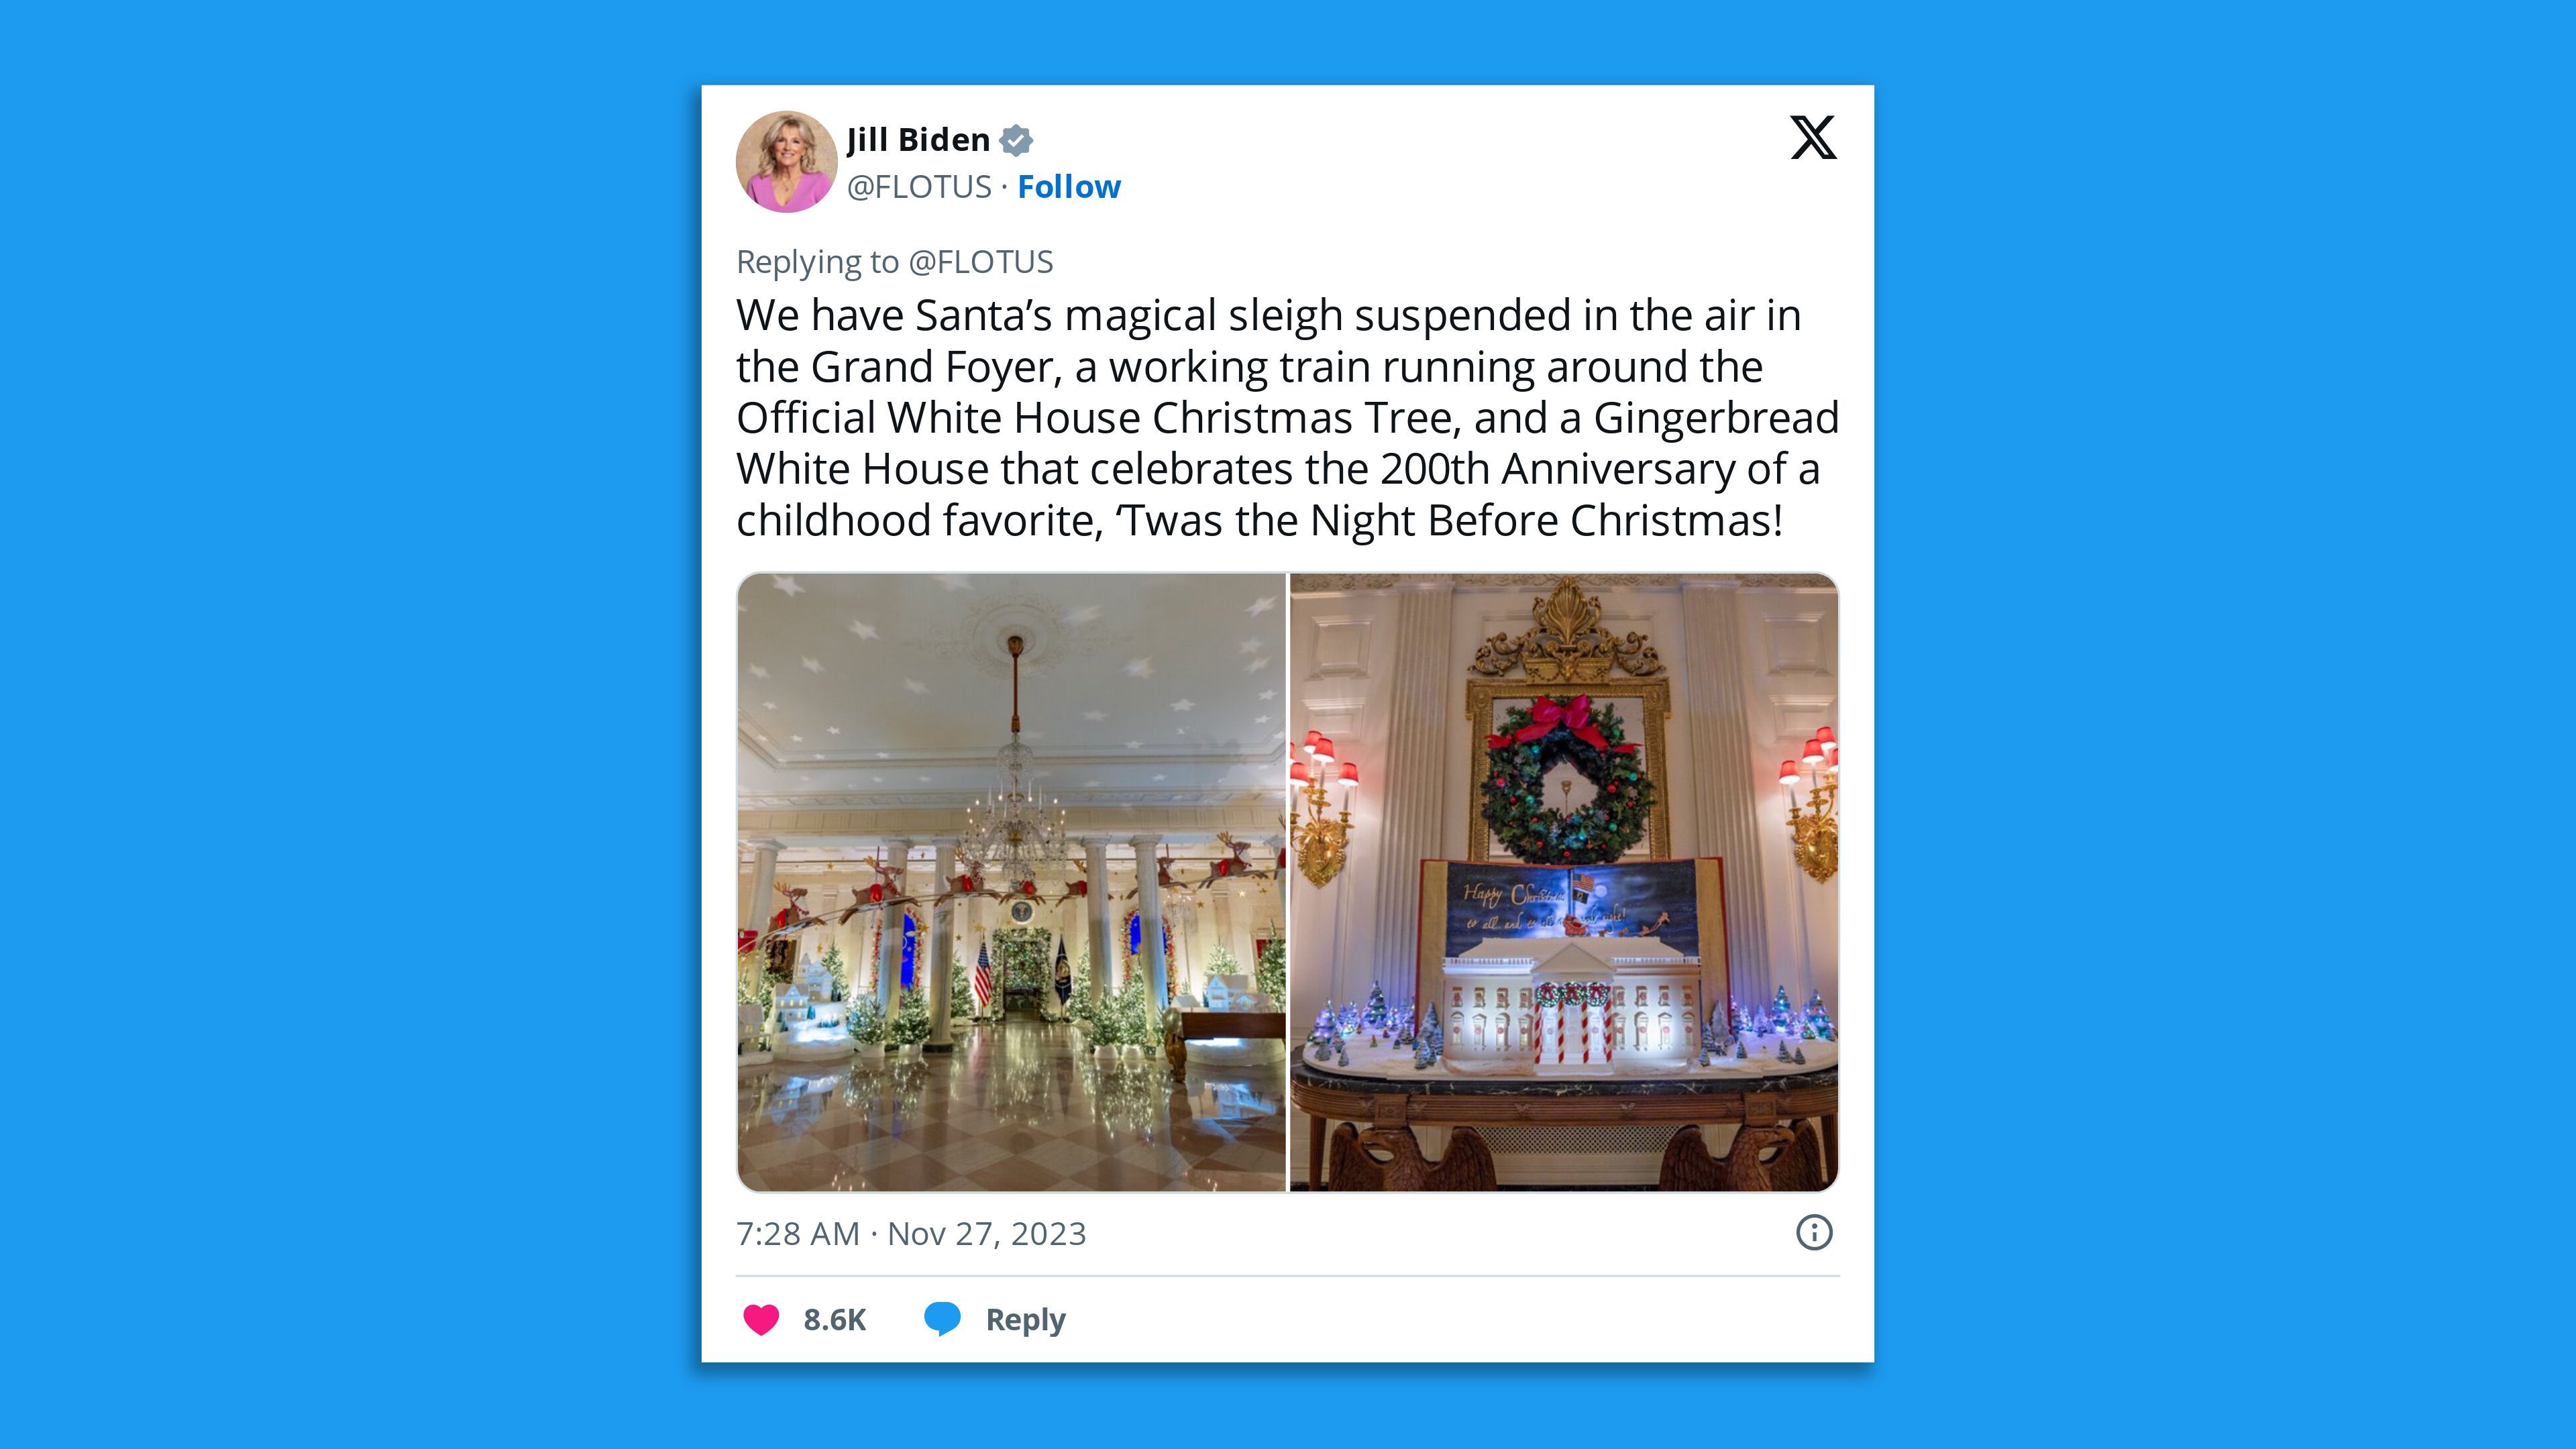 A screenshot of two Twitter photos by first lady Jill Biden showing White House Christmas decorations with the caption: "We have Santa’s magical sleigh suspended in the air in the Grand Foyer, a working train running around the Official White House Christmas Tree, and a Gingerbread White House that celebrates the 200th Anniversary of a childhood favorite, ‘Twas the Night Before Christmas!"